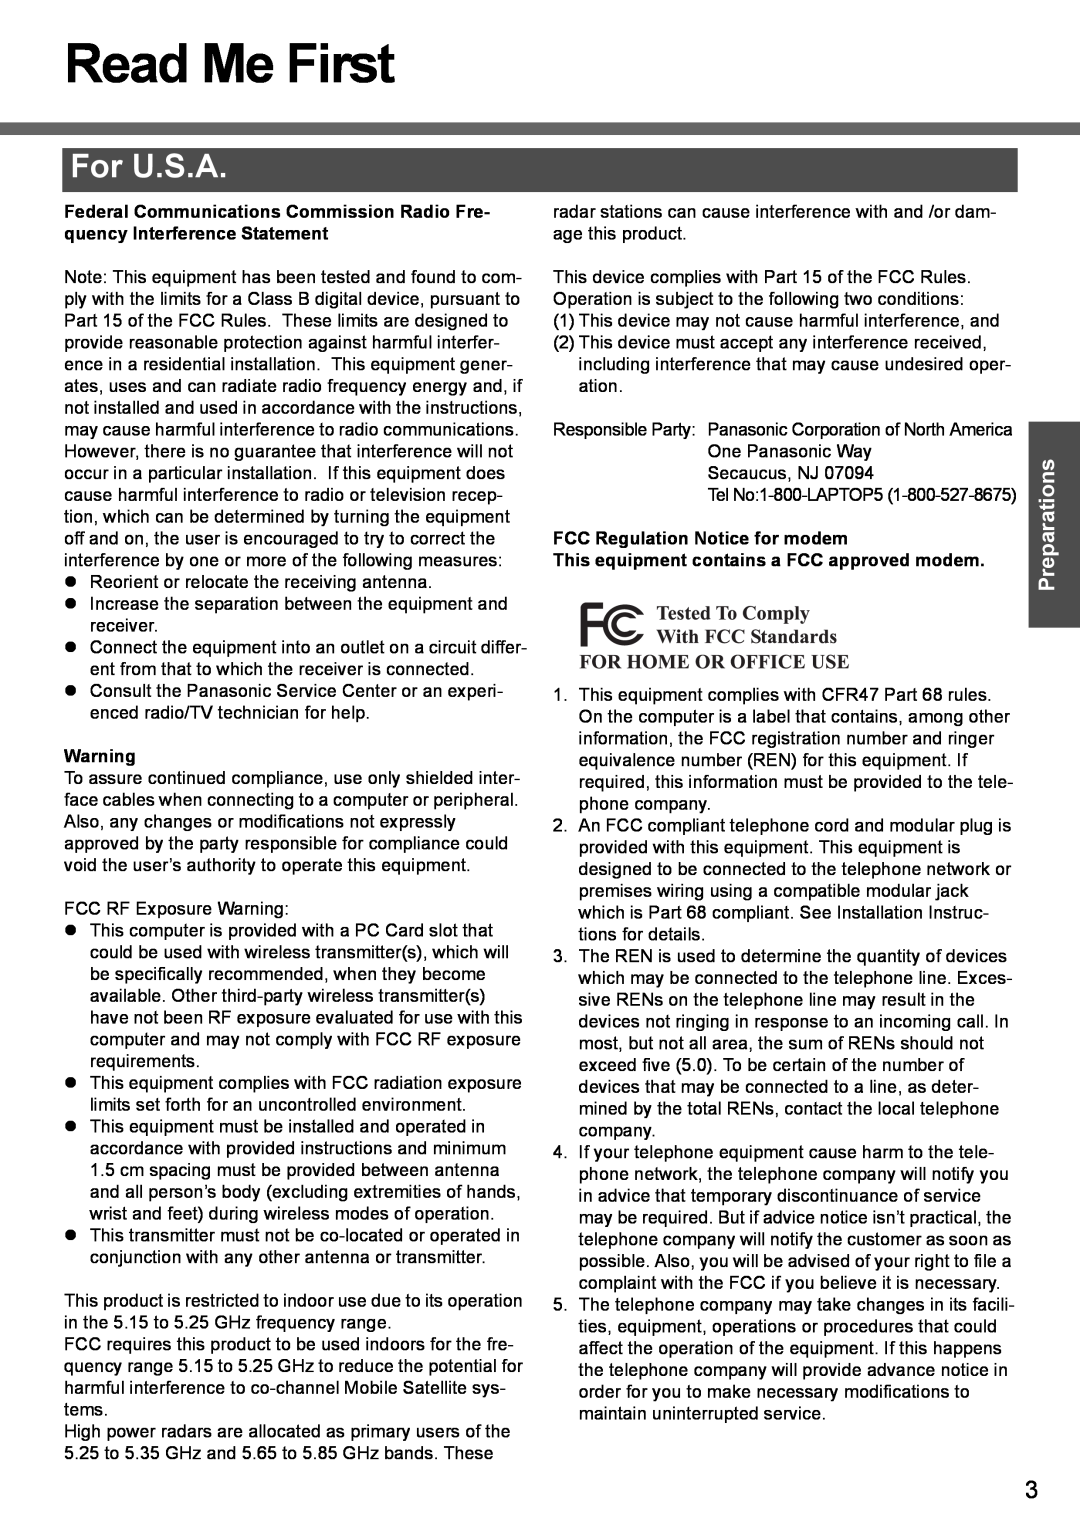 Panasonic CF-T4 operating instructions Read Me First, For U.S.A, Preparations 